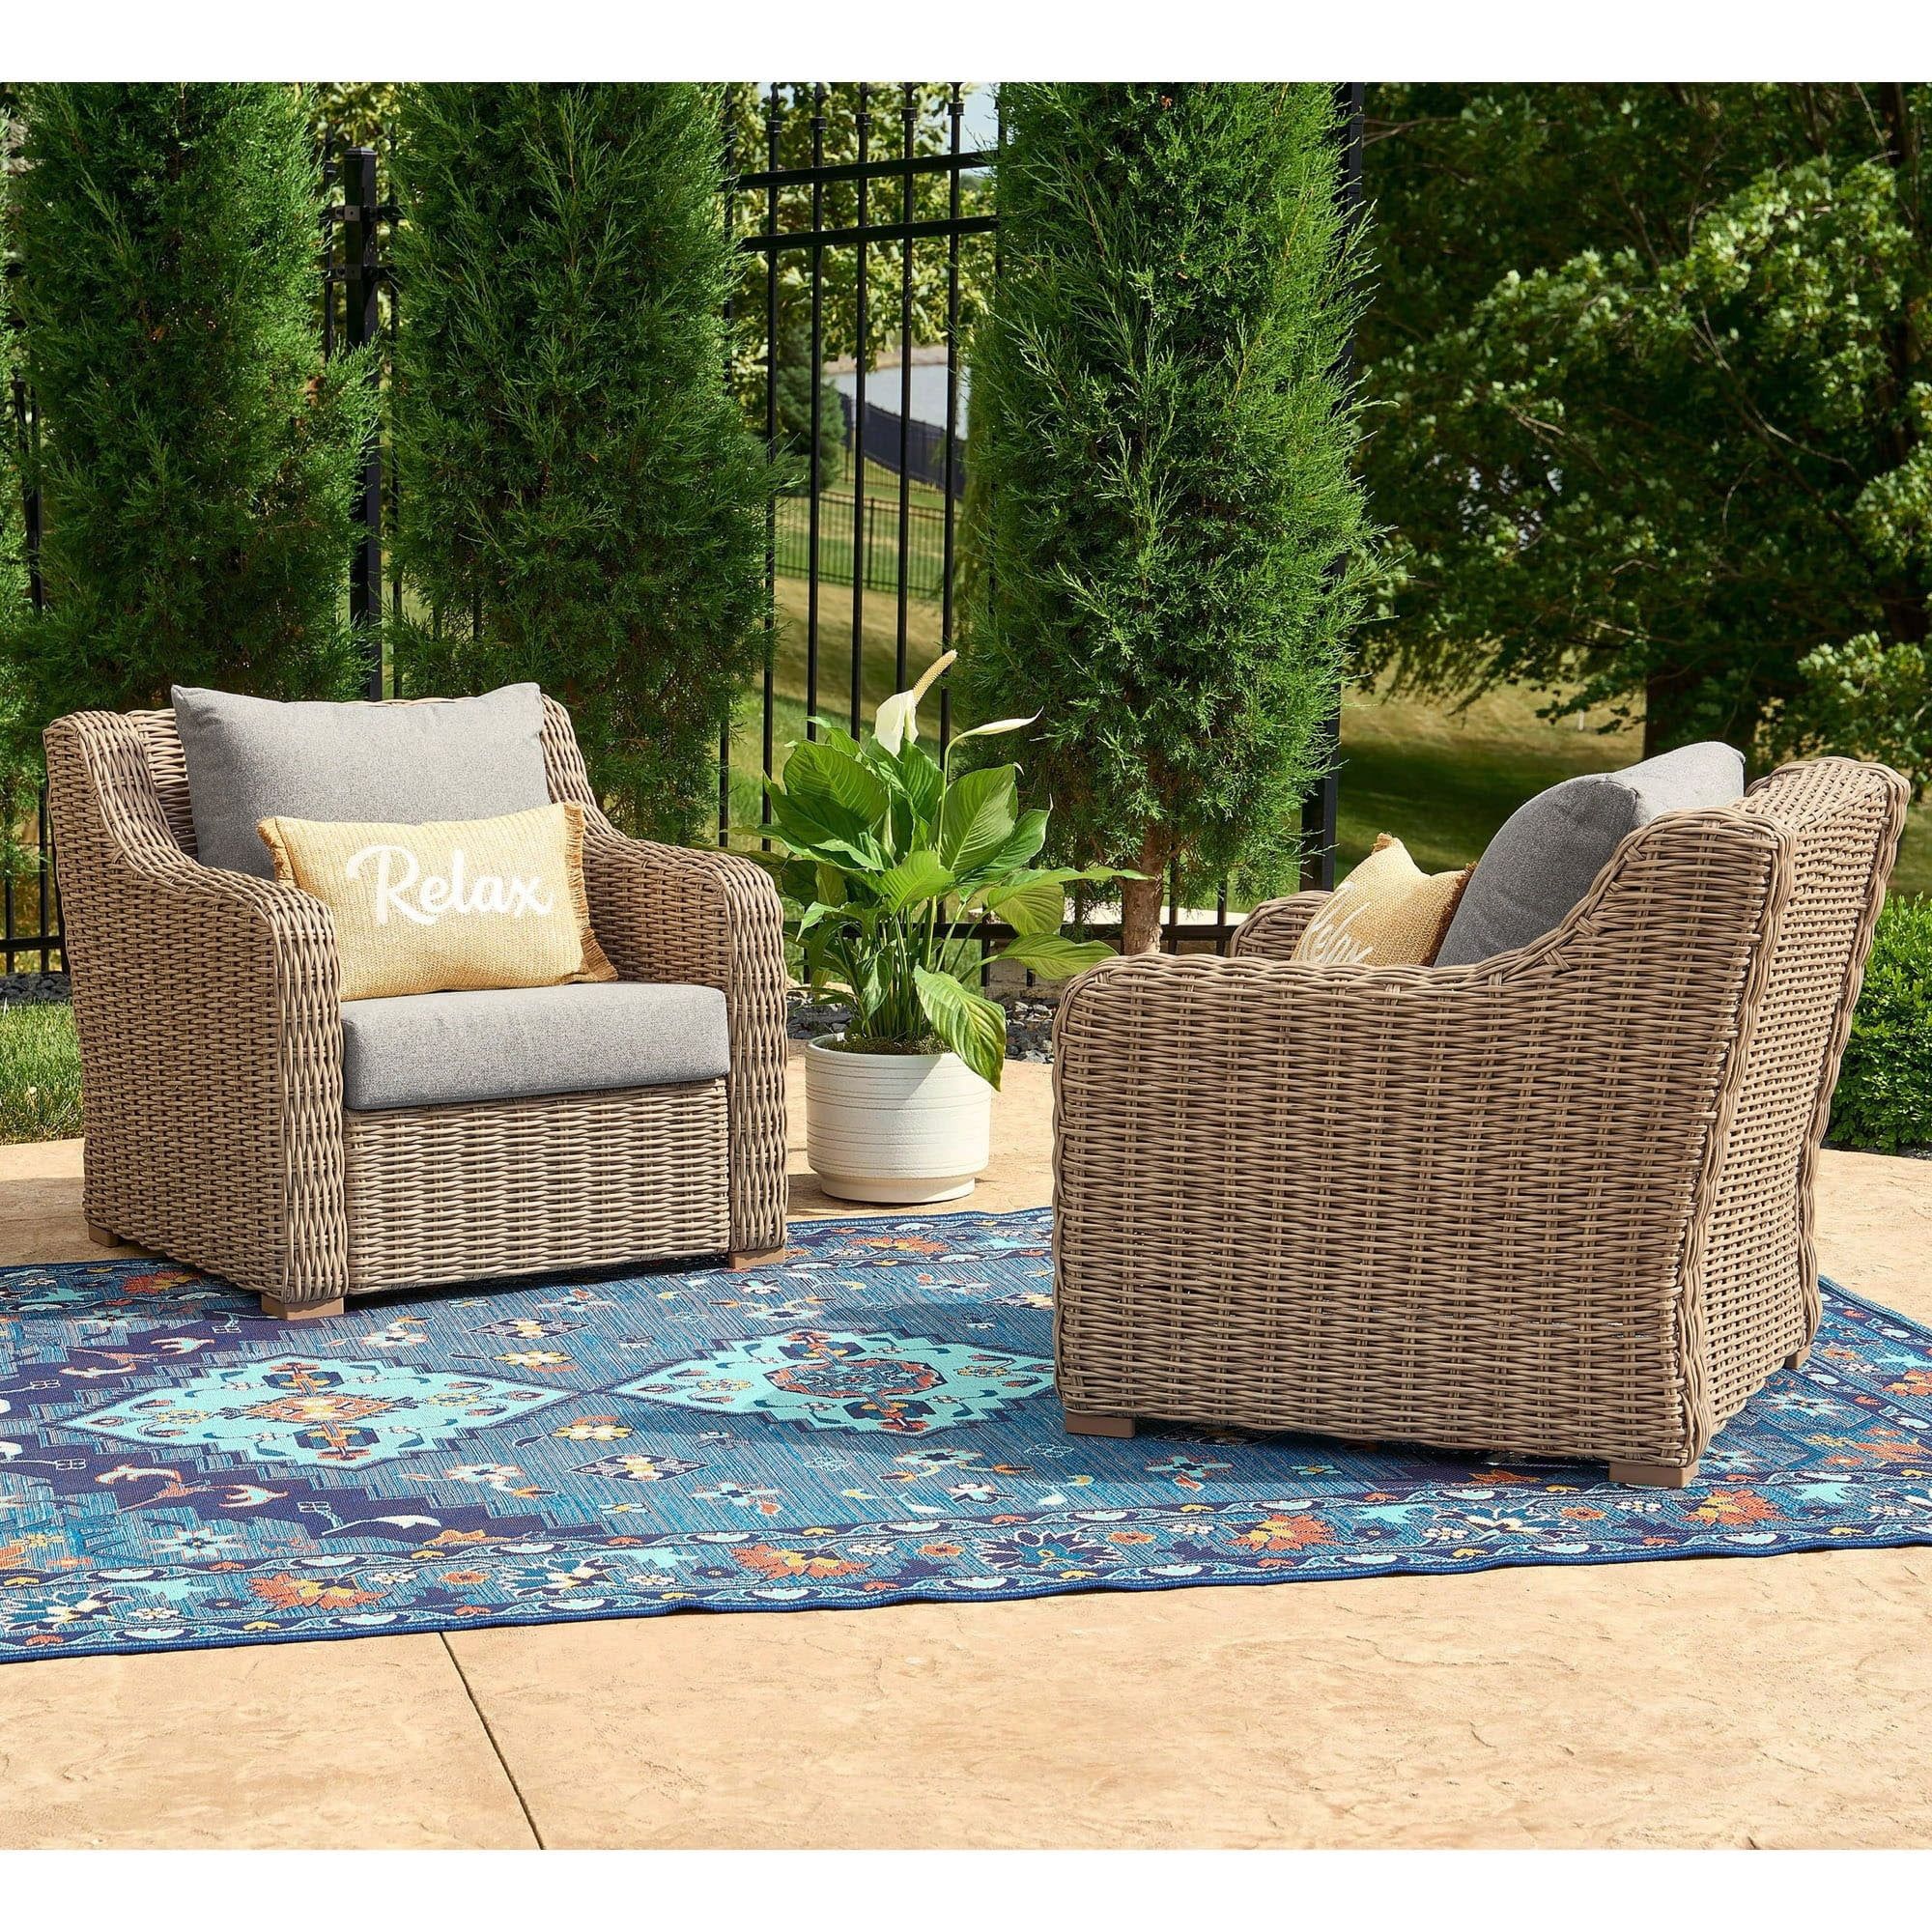 2-Pack Outdoor Chairs Gray Patio Chair Walmart Finds Patio Furniture #LTKhome #LTKfamily #LTKkids | Walmart (US)